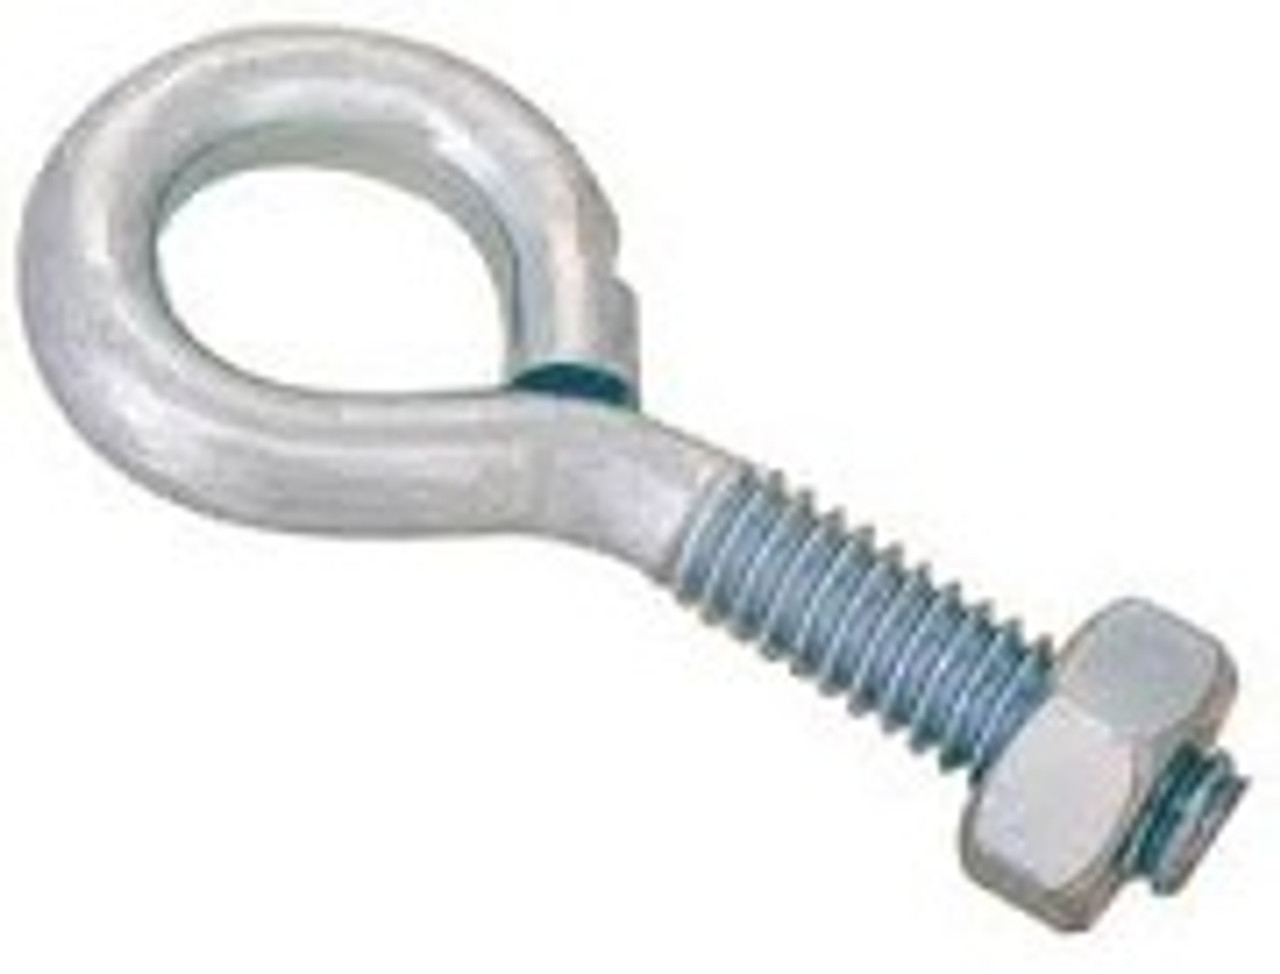 1/4-20 x 3-1/2 Bent Eye Bolt w/ Nuts - Plated Steel